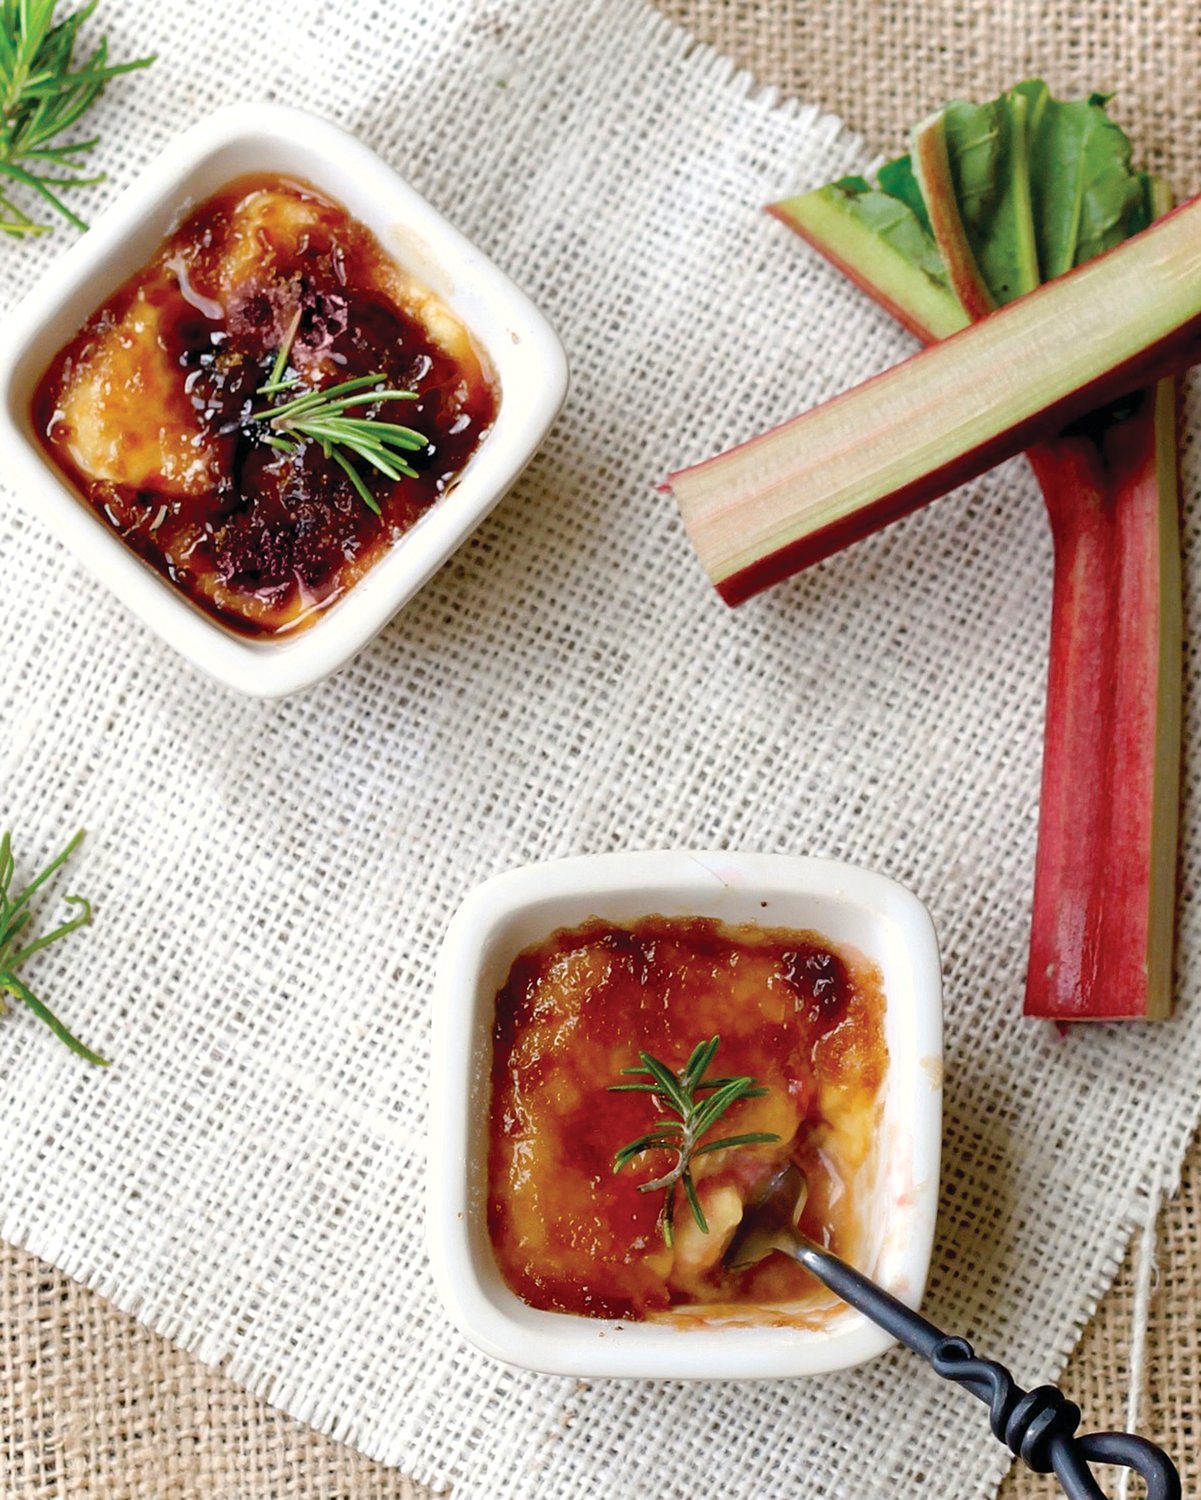 Rhubarb and rosemary are surprising bedfellows in this creme brulee.